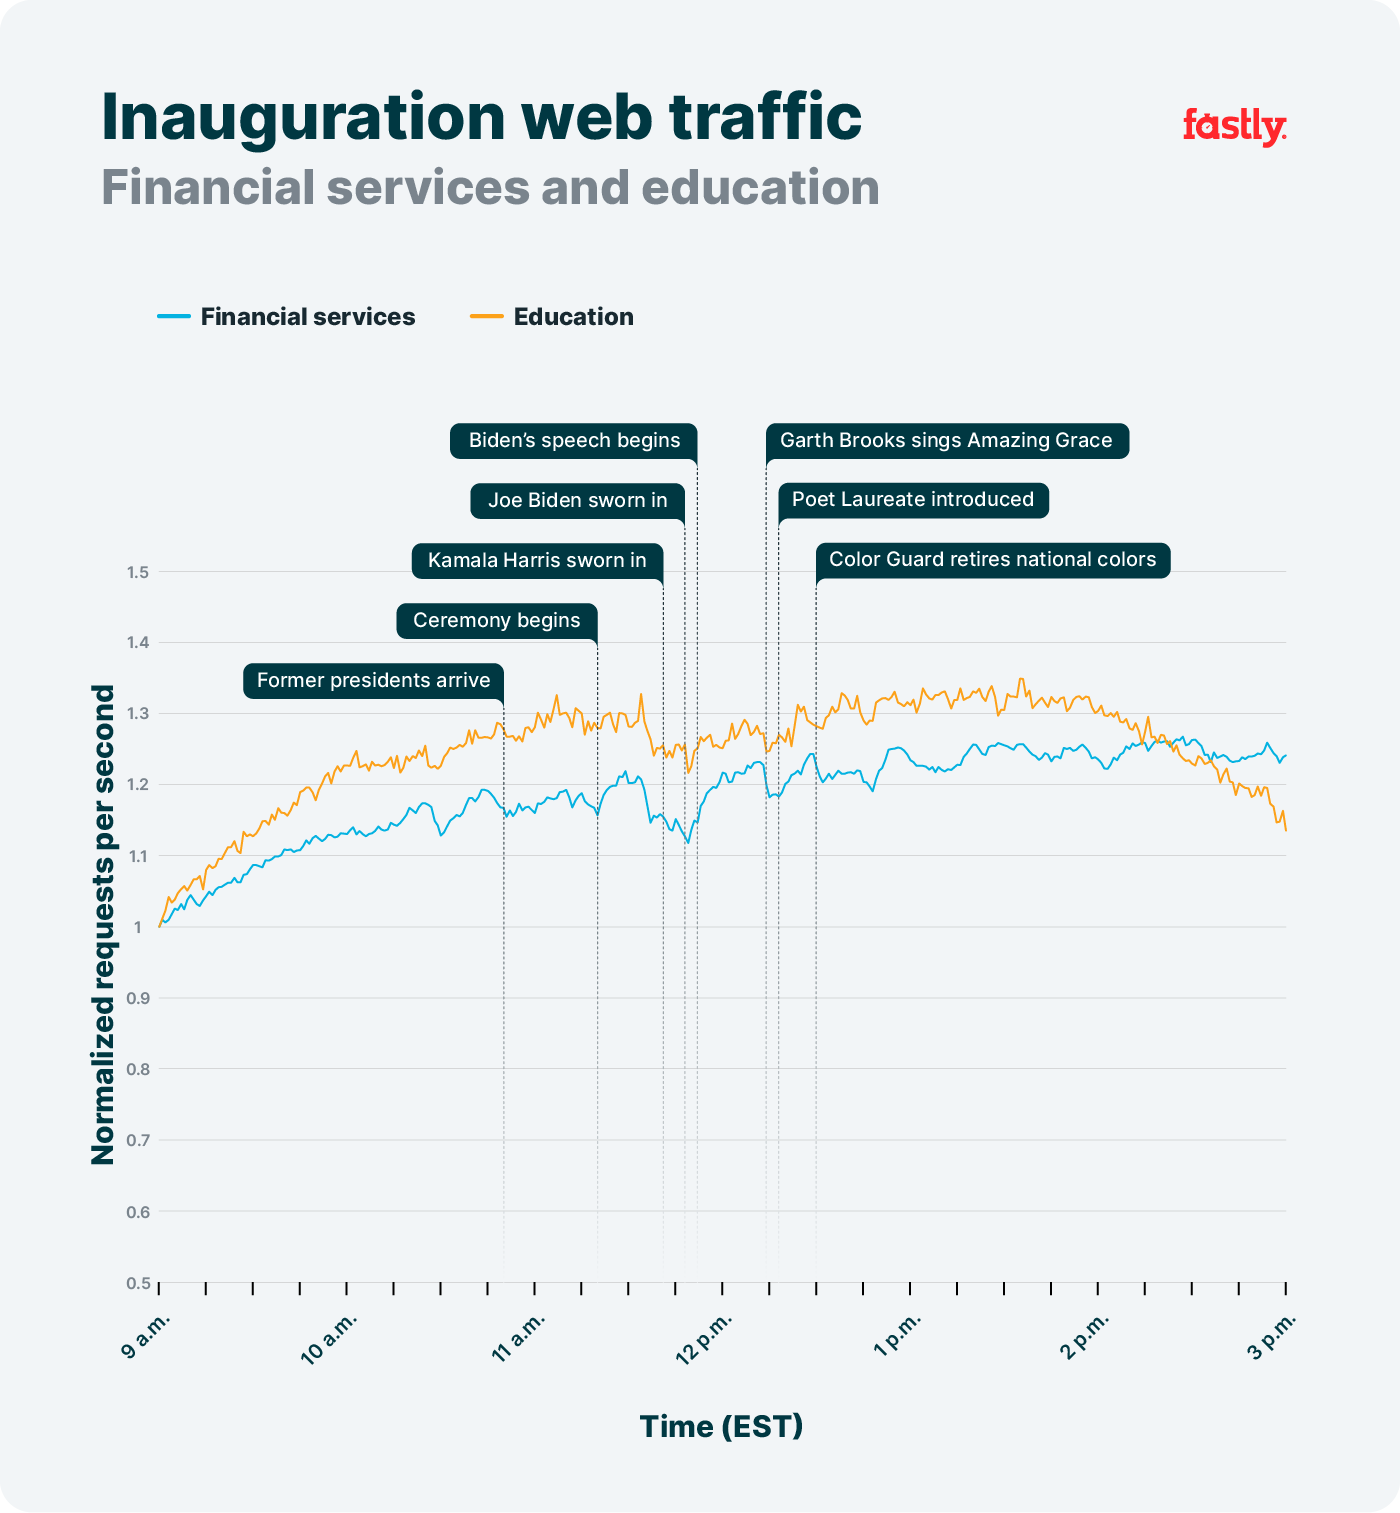 Finserv and education traffic during inauguration